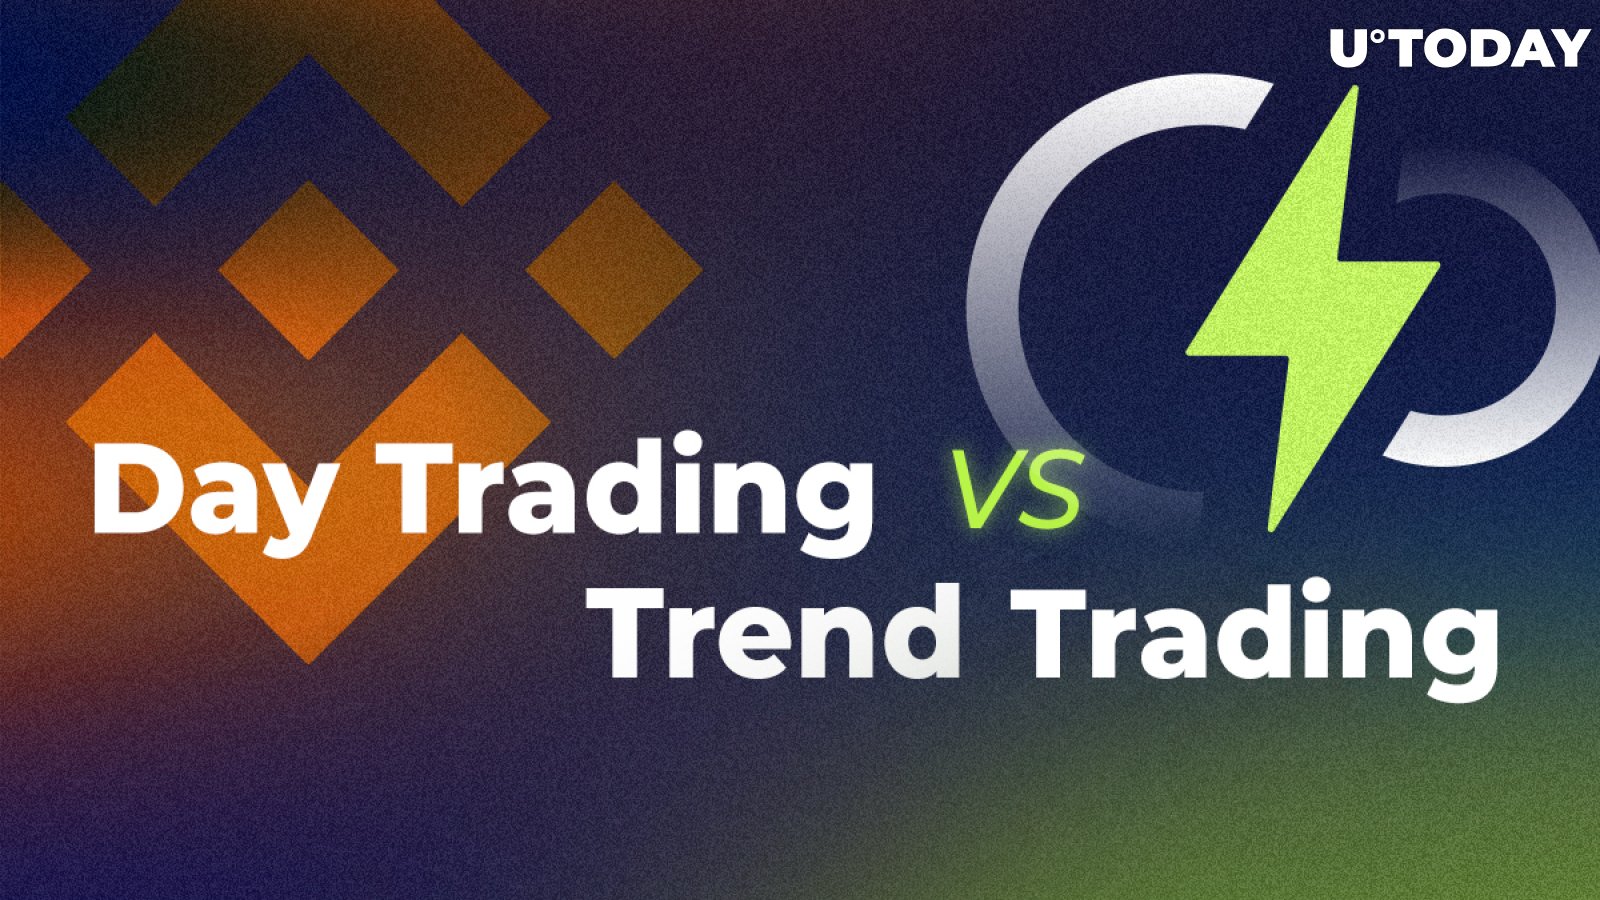 Day Trading vs. Trend Trading: Differences and Strategies